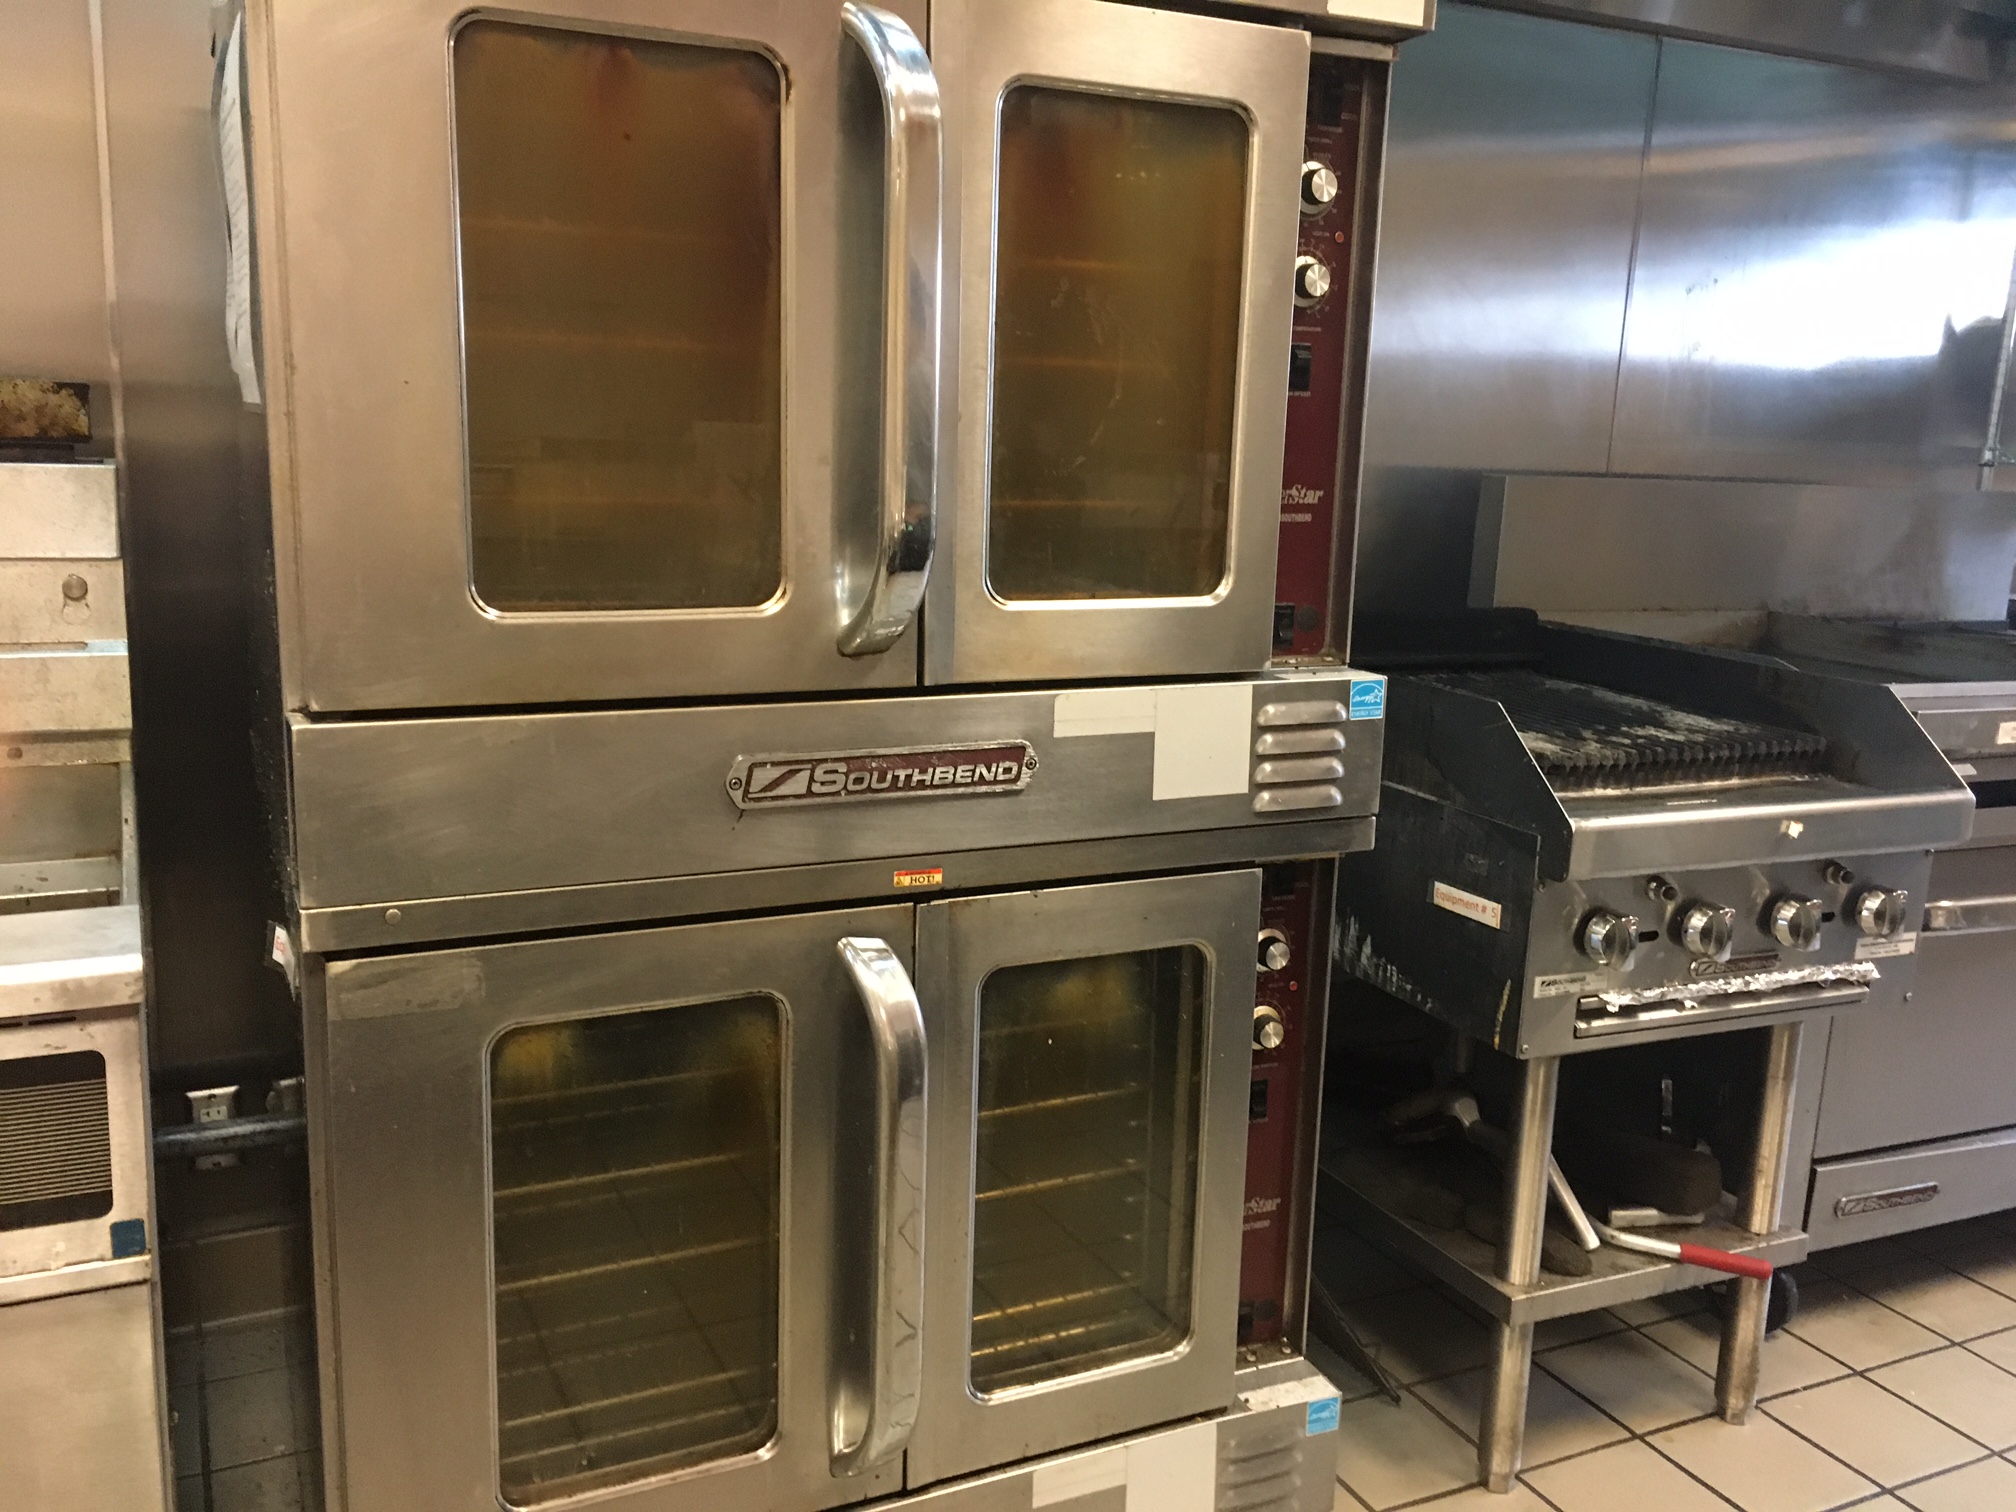 4 convection ovens